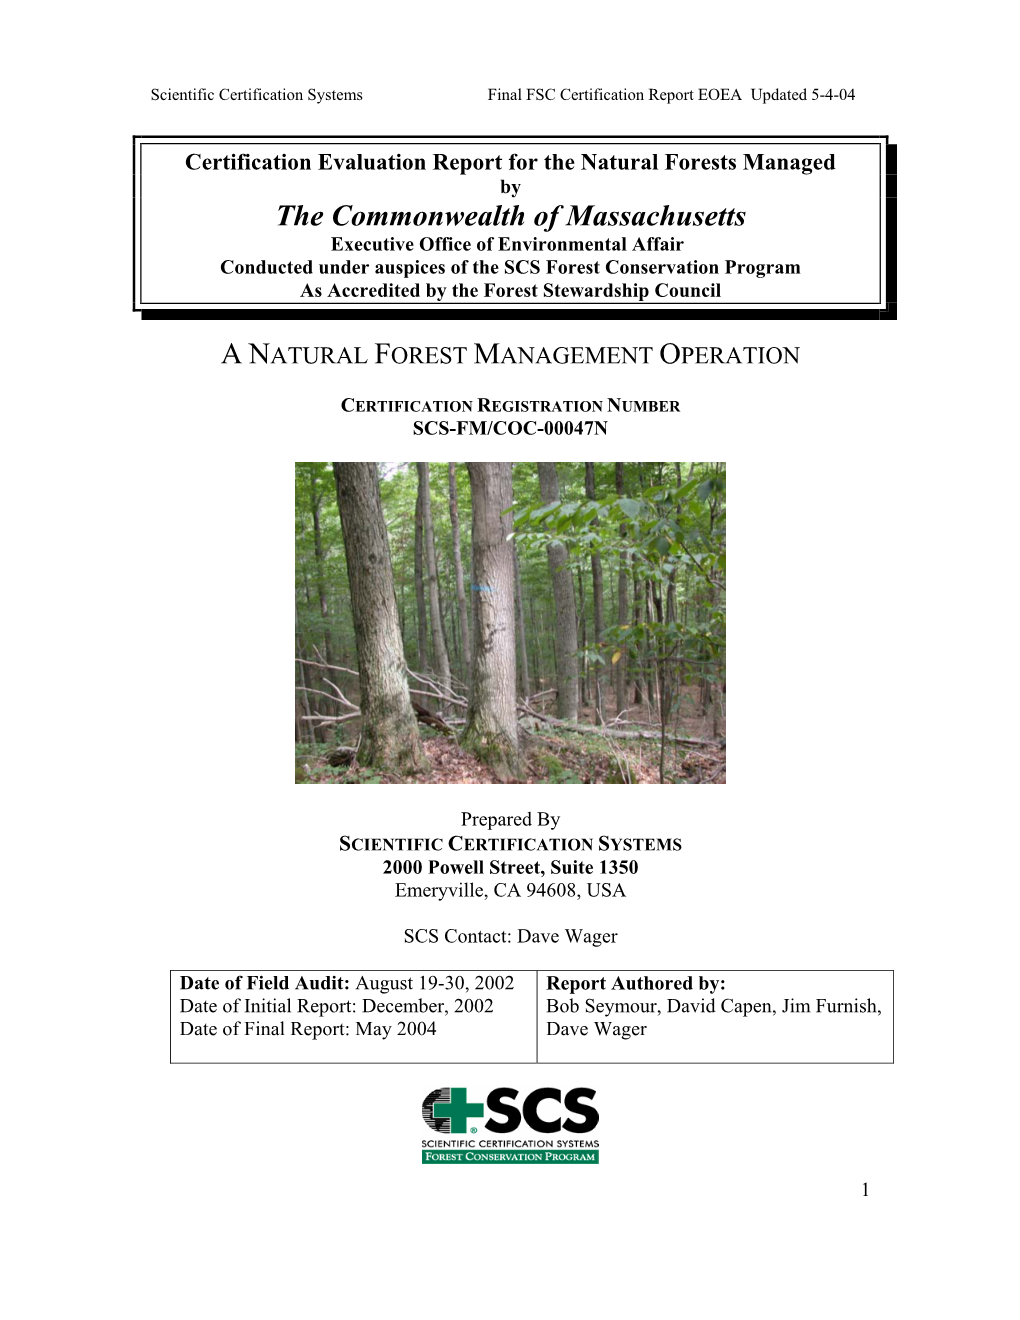 Forest Certification Report